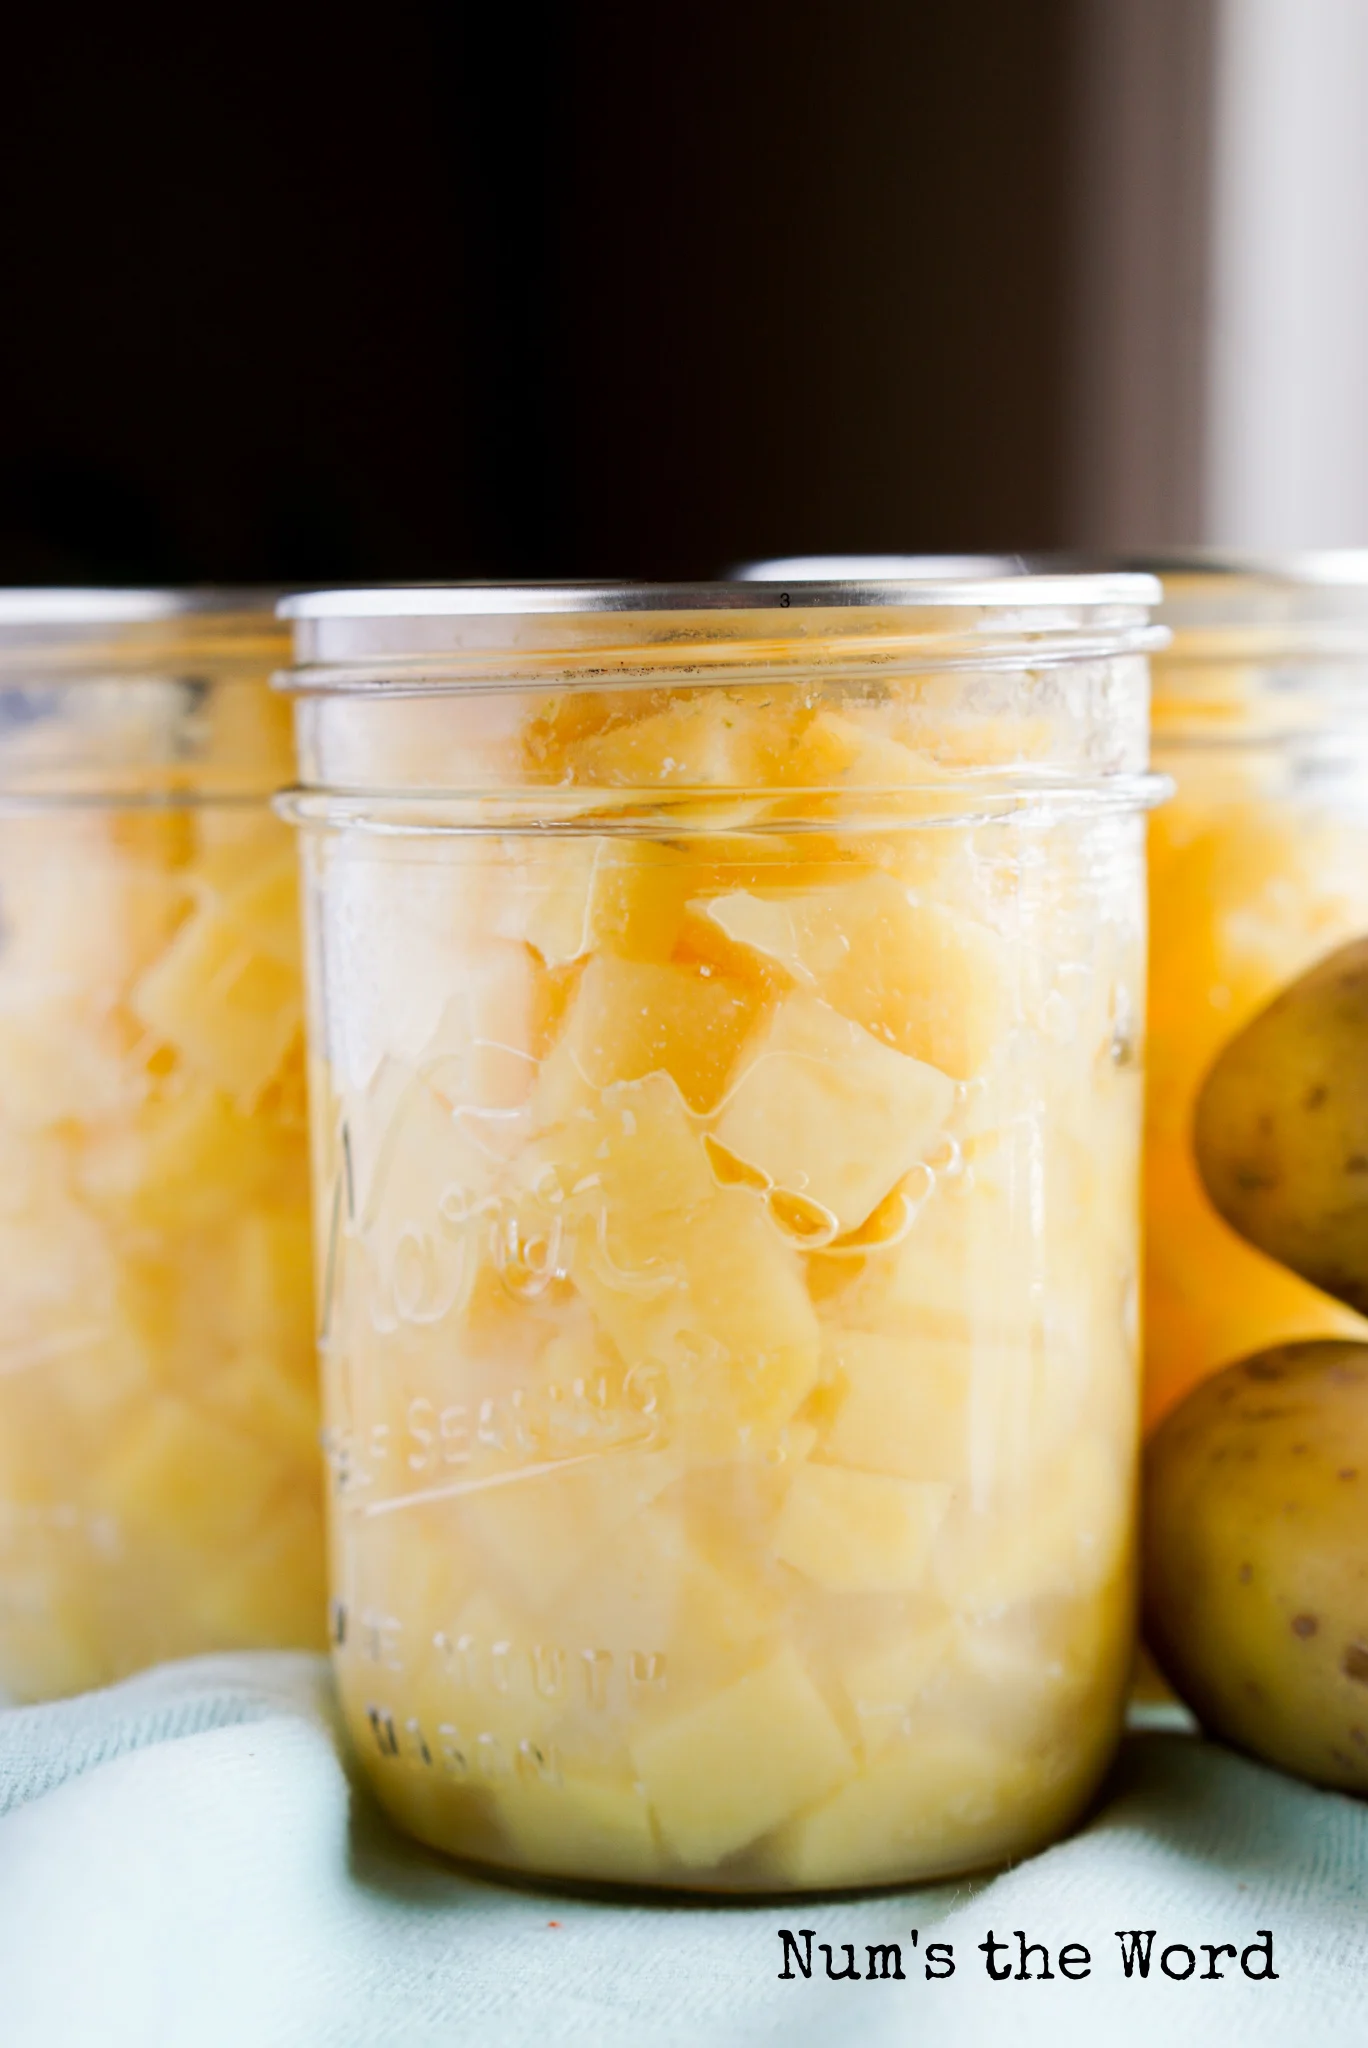 3 jars of diced potatoes canned, showing a little starch at the bottom.